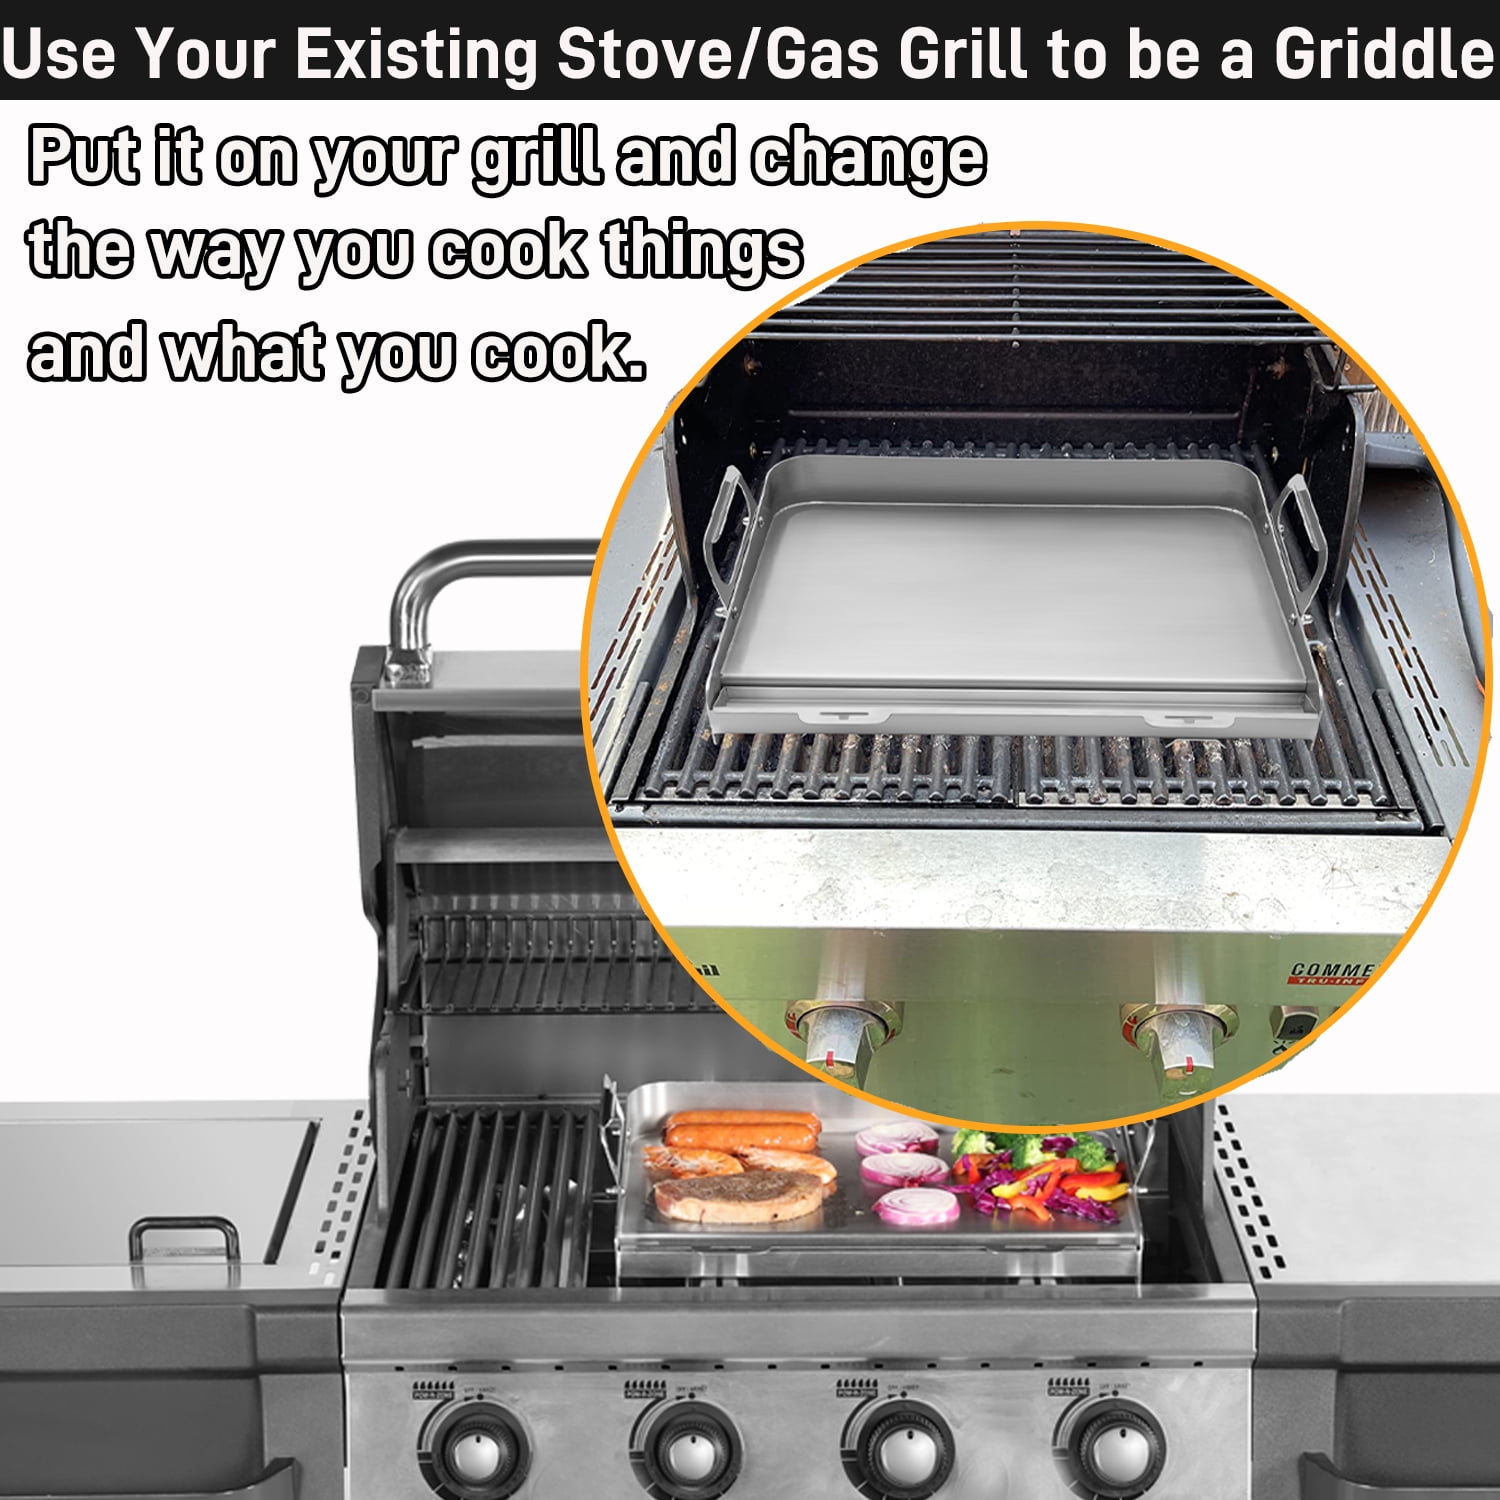 Fry Griddle Flat Top Plate 17 X13” Cooking Griddle Pan Fits Weber Nexgrill Charbroil Kenmore Etc GAS Stove/Gas Fits Charcoal Electric Grills